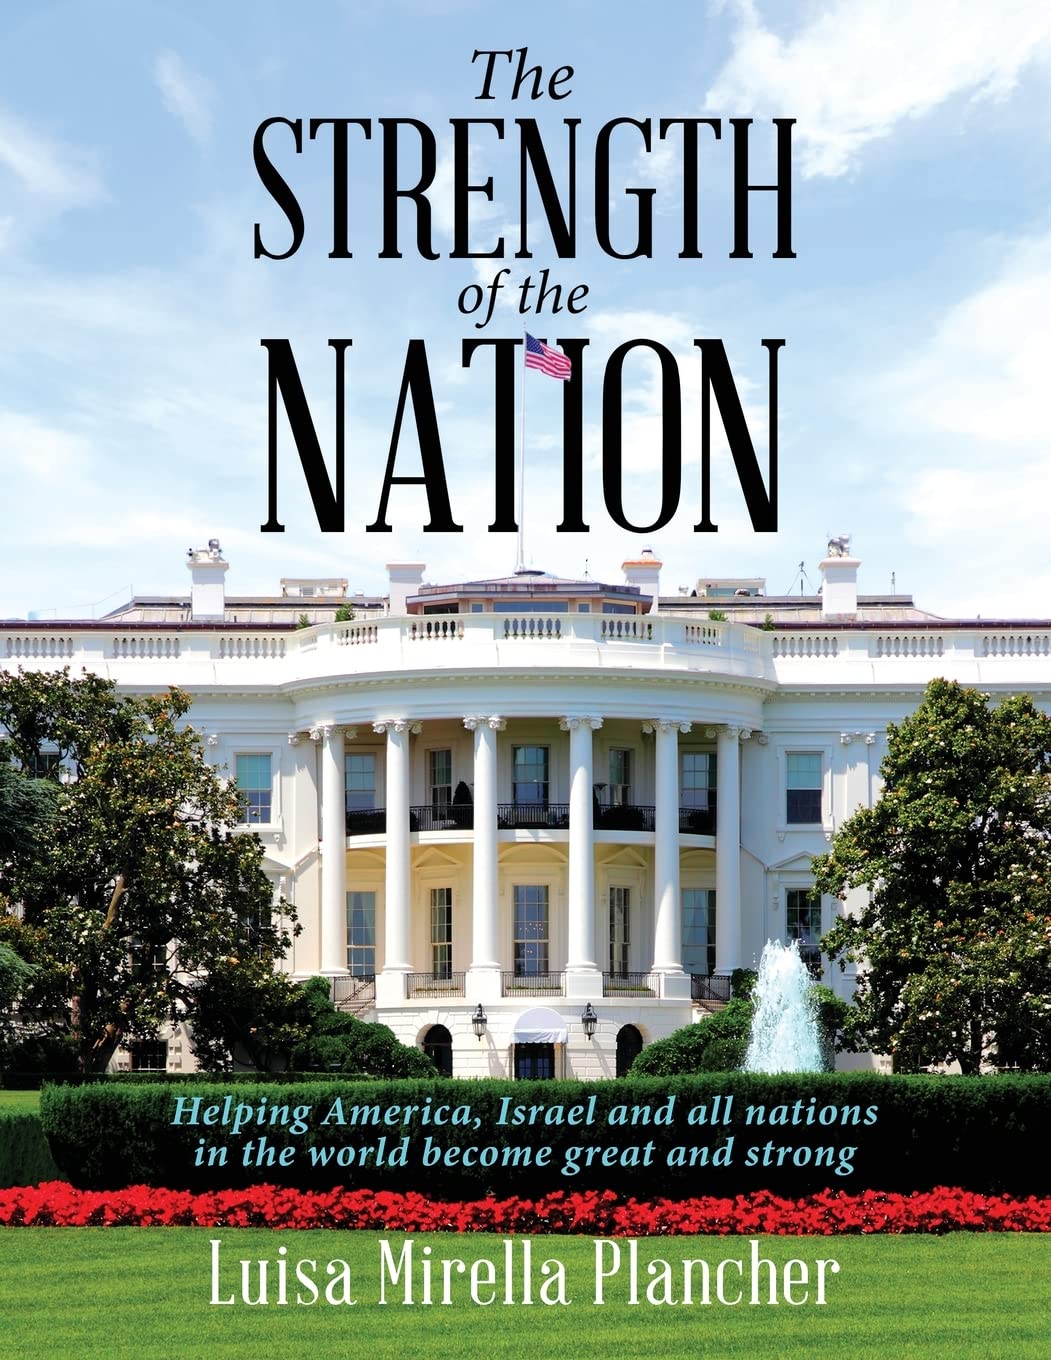 The Hollywood Book Reviews on The Strength of the Nation by Luisa Mirella Plancher